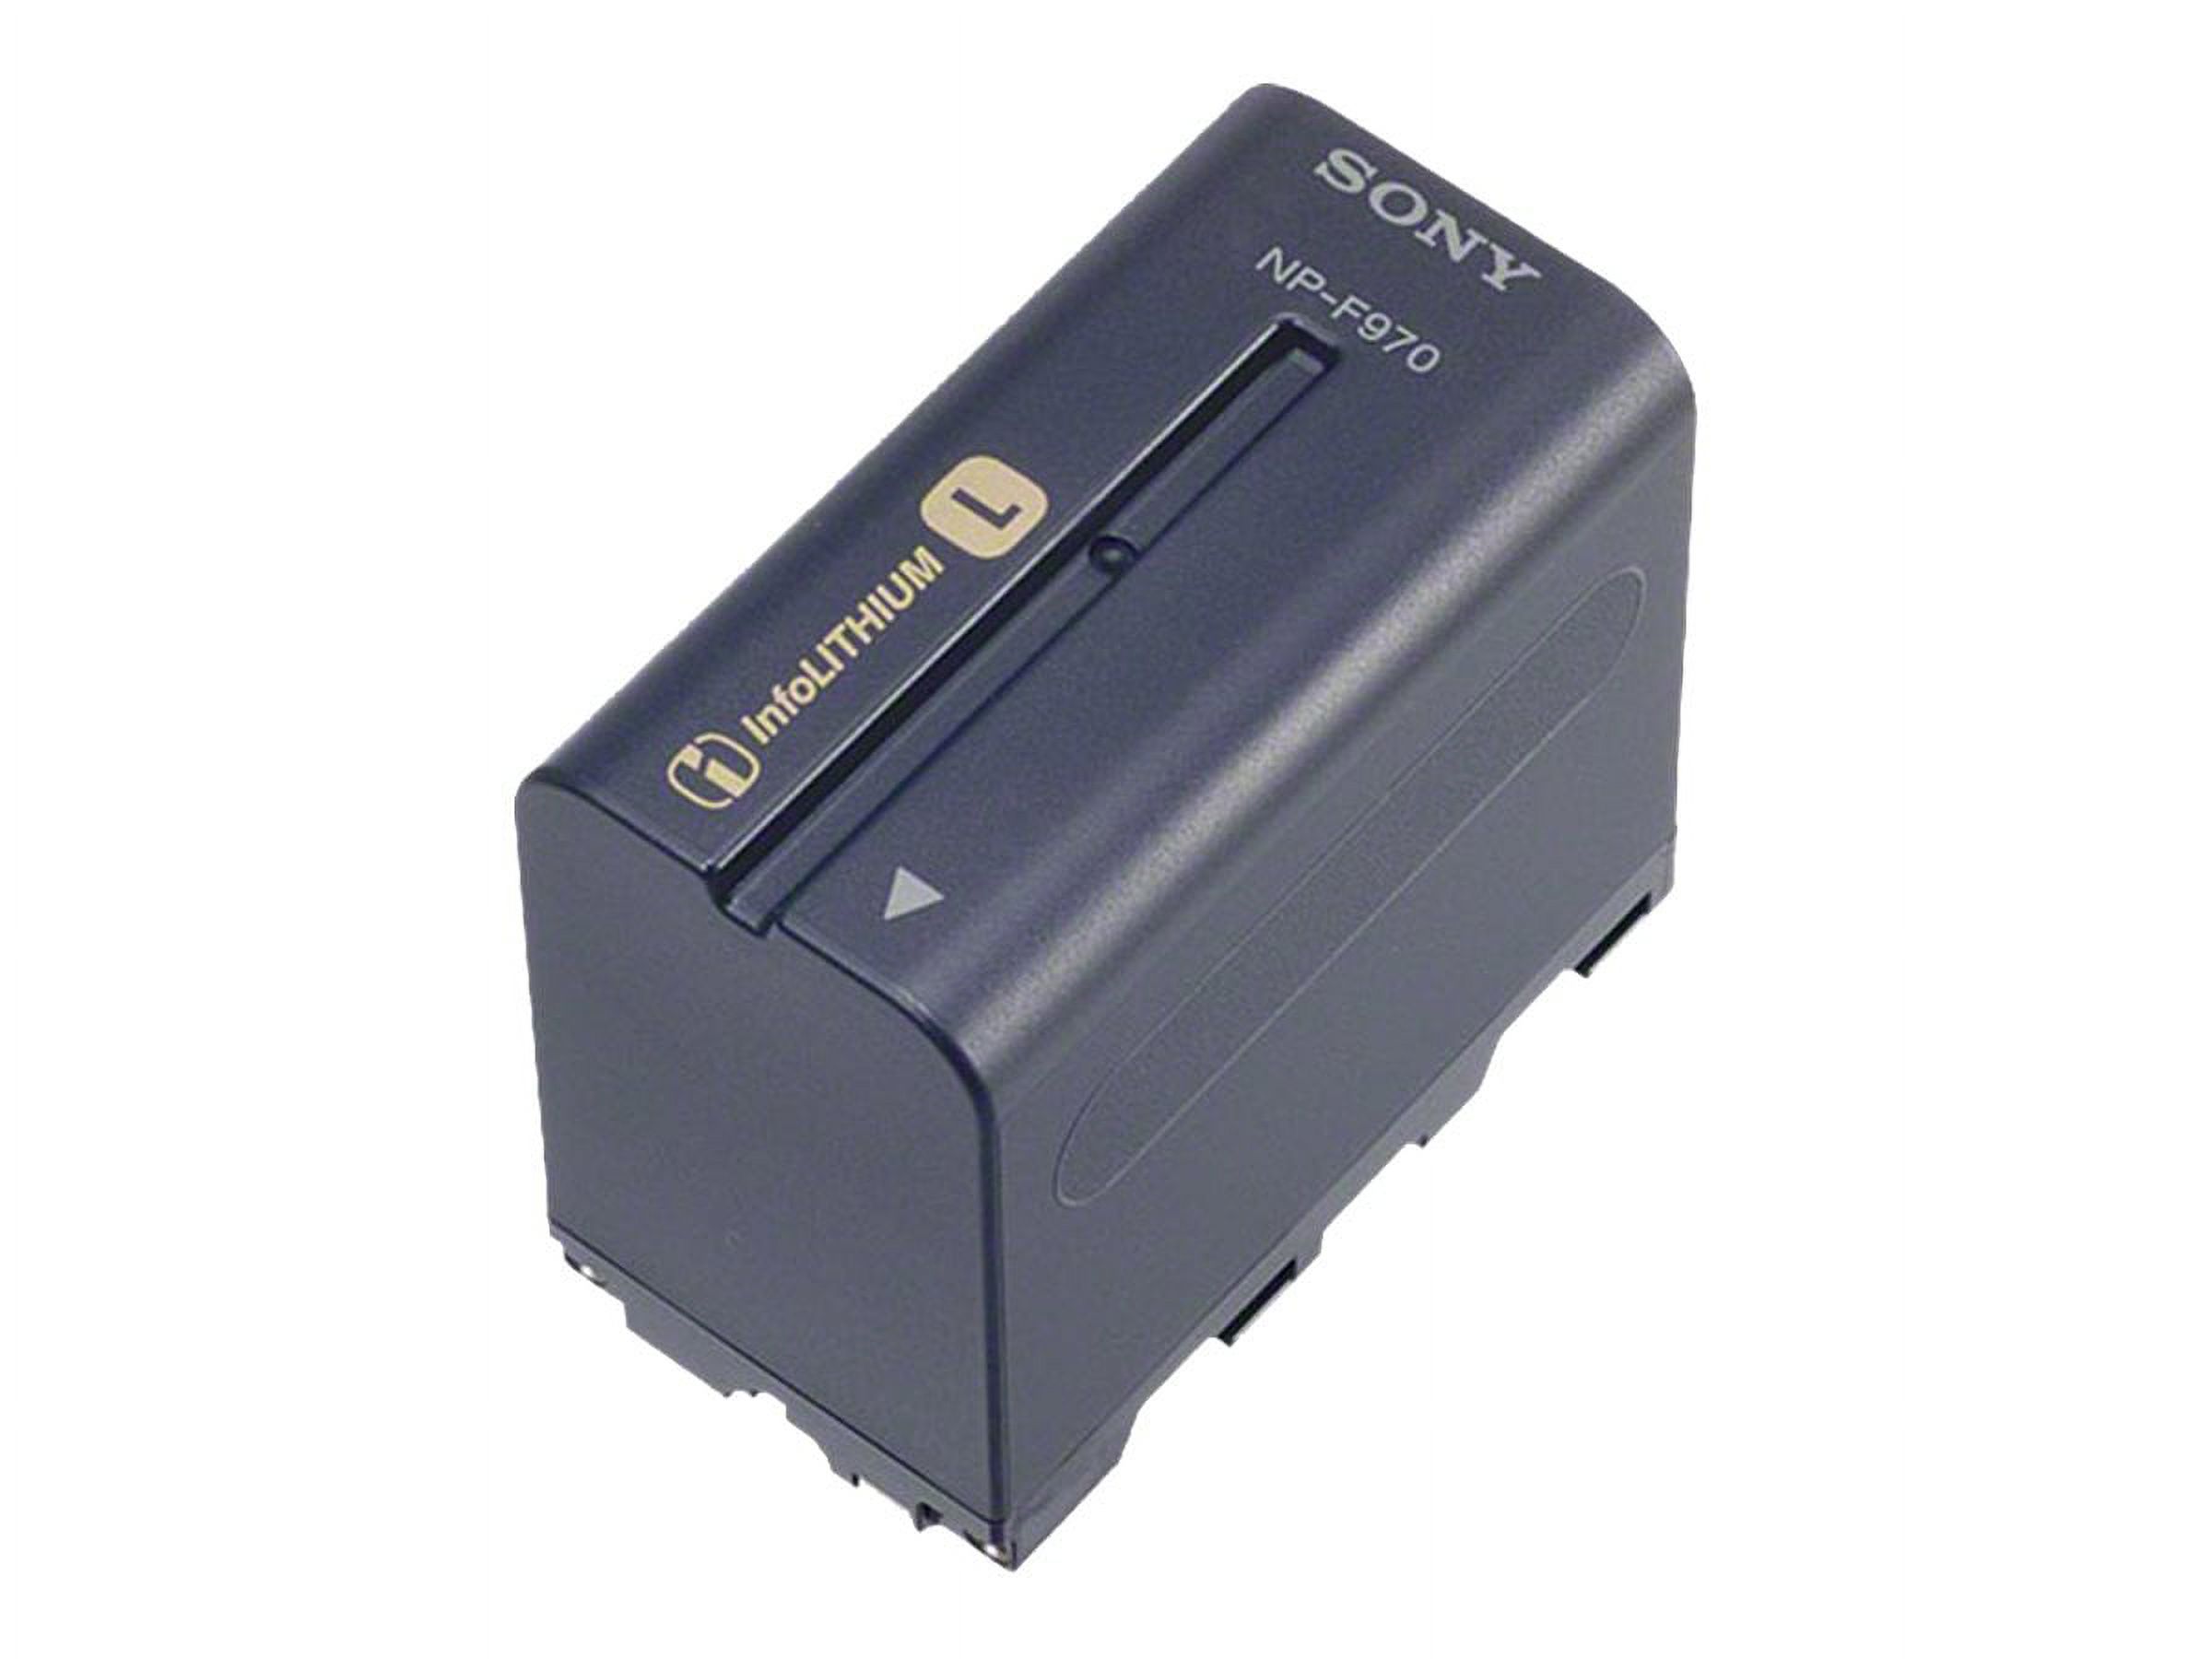 Sony NP-F970 - Camcorder battery - Li-Ion - 6600 mAh - for Sony HVR-V1P, Z1J, Z7J; NXCAM HXR-NX100, NX200, NX5R, NEX-FS100, FS700; XDCAM PXW-Z150 - image 1 of 2